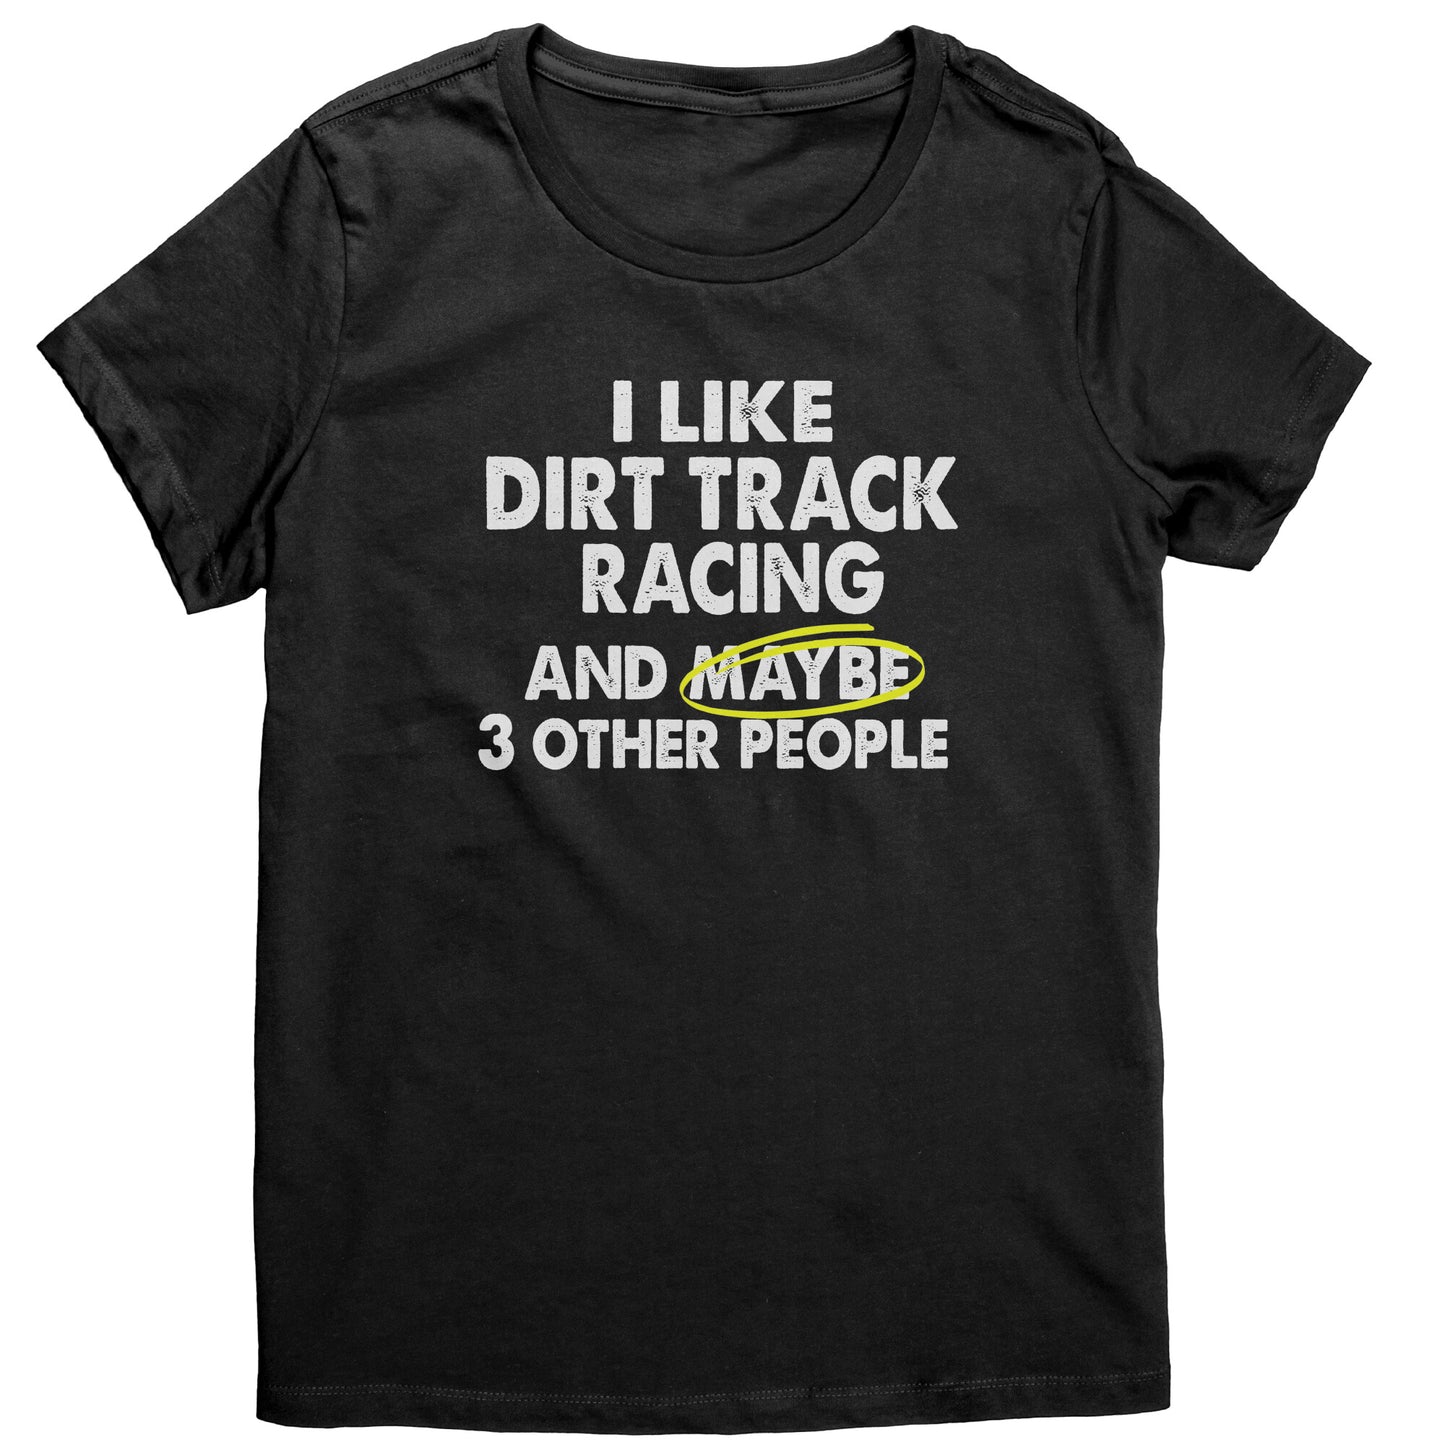 I LIKE DIRT RACING AND MAYBE 3 OTHER PEOPLE WOMEN'S T-SHIRT